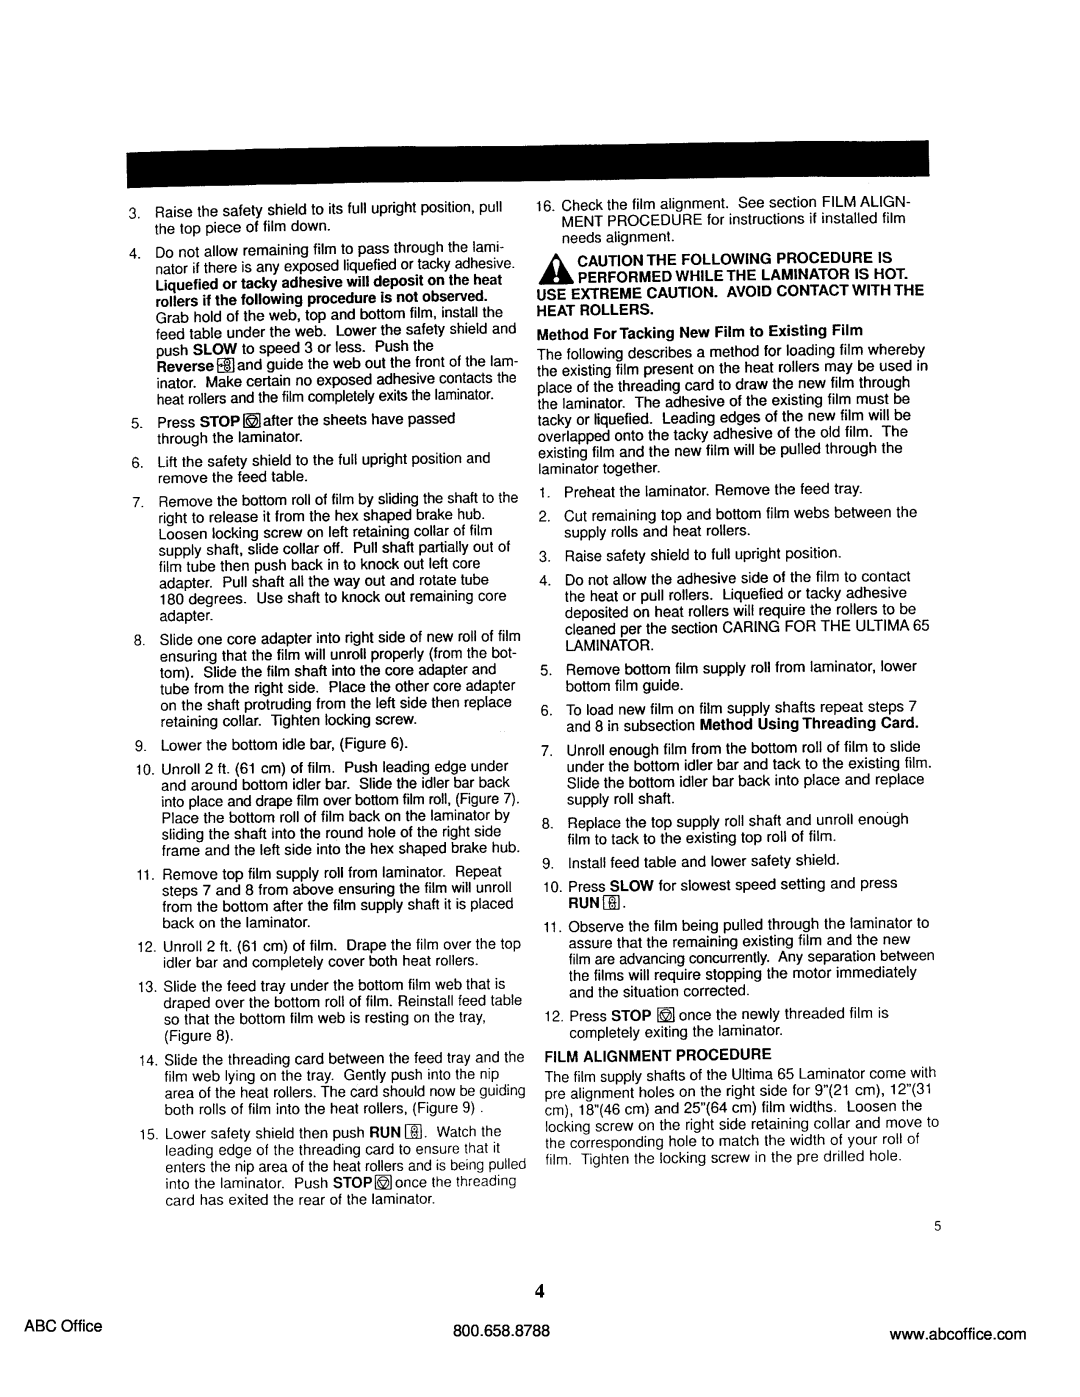 ABC Office ULTIMA 65 operating instructions ABC Office, 800.658.8788 